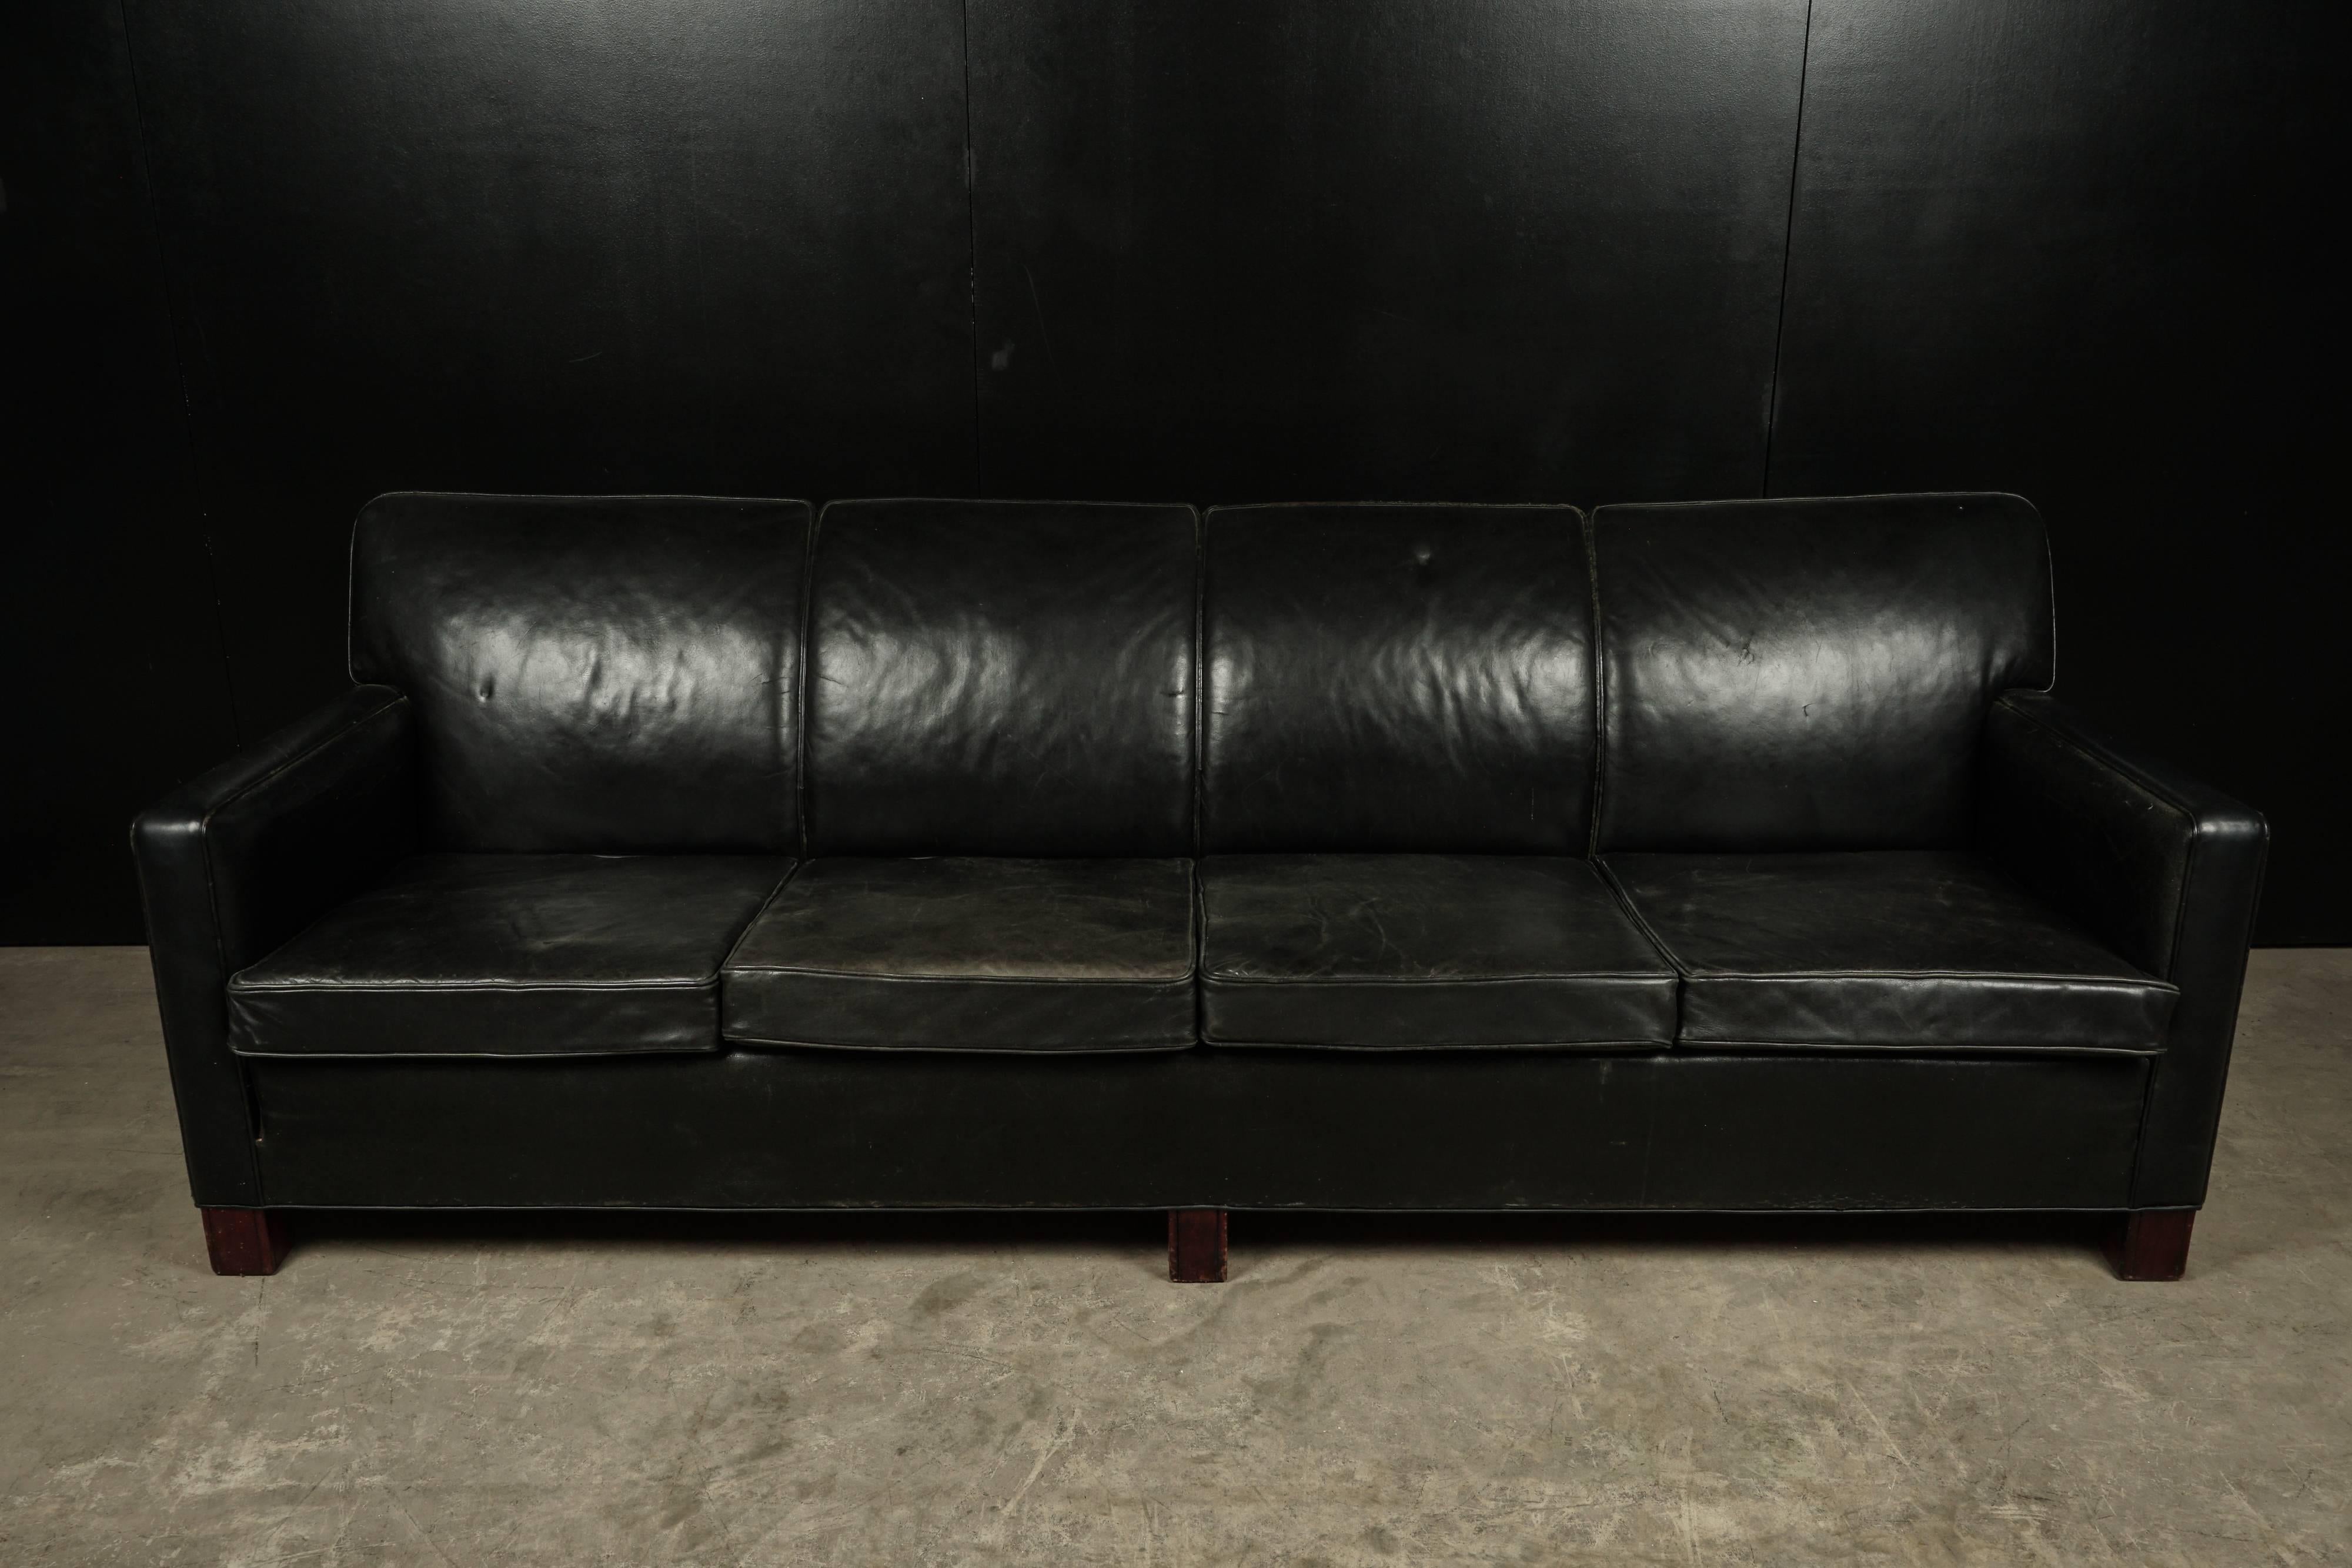 Large four-seat leather sofa from Denmark, circa 1950. Danish cabinet maker, presumably designed by Flemming Lassen. Leather with nice patina and wear.
Measures: Seat height 18